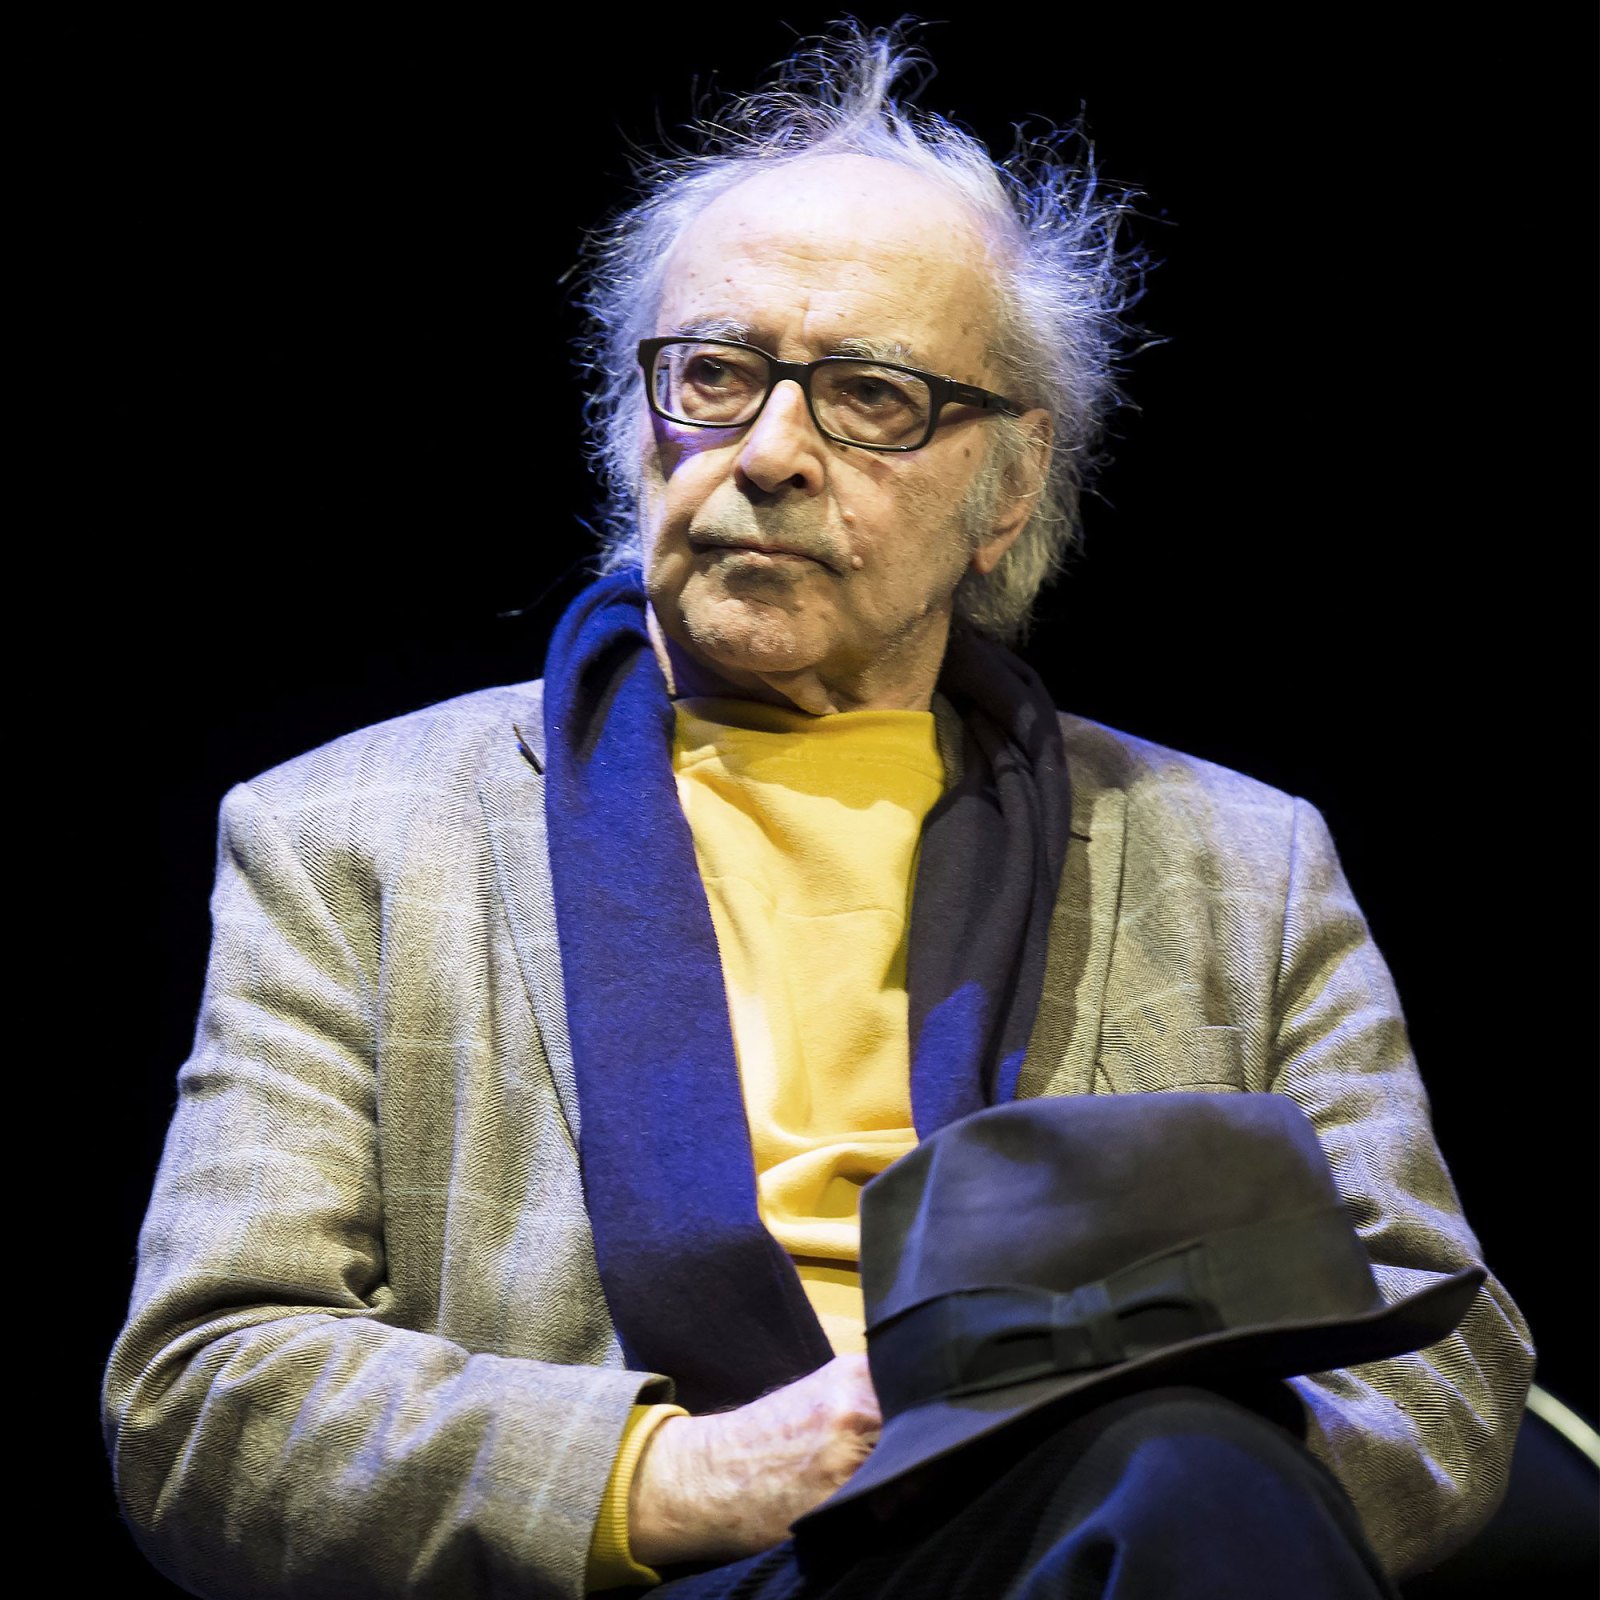 French Director Jean-Luc Godard Dies by Assisted Suicide in Switzerland at 91